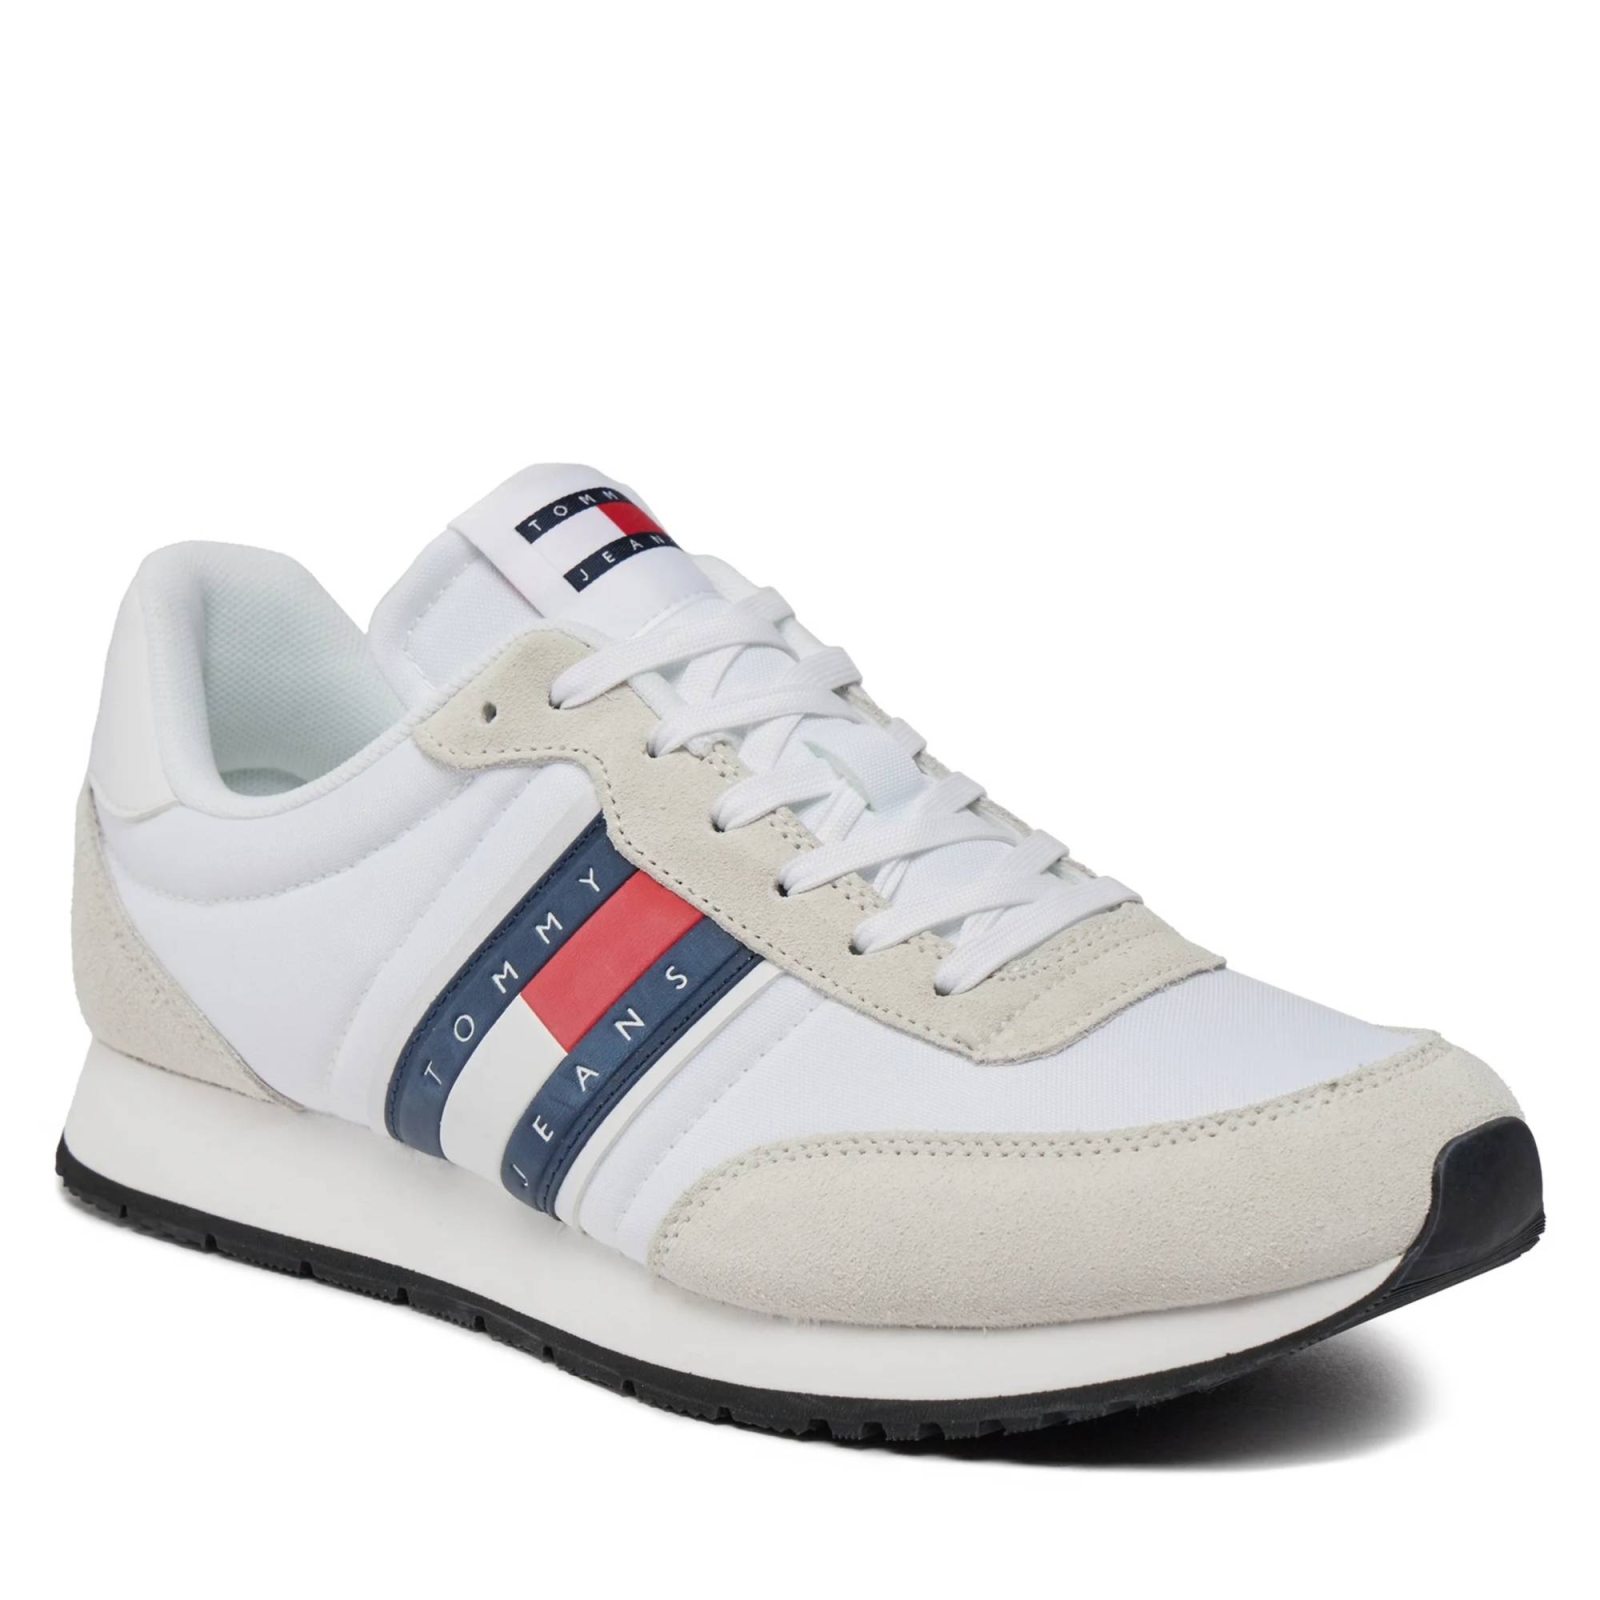 TOMMY HILFIGER RUNNER CASUAL ESSENTIAL SNEAKERS